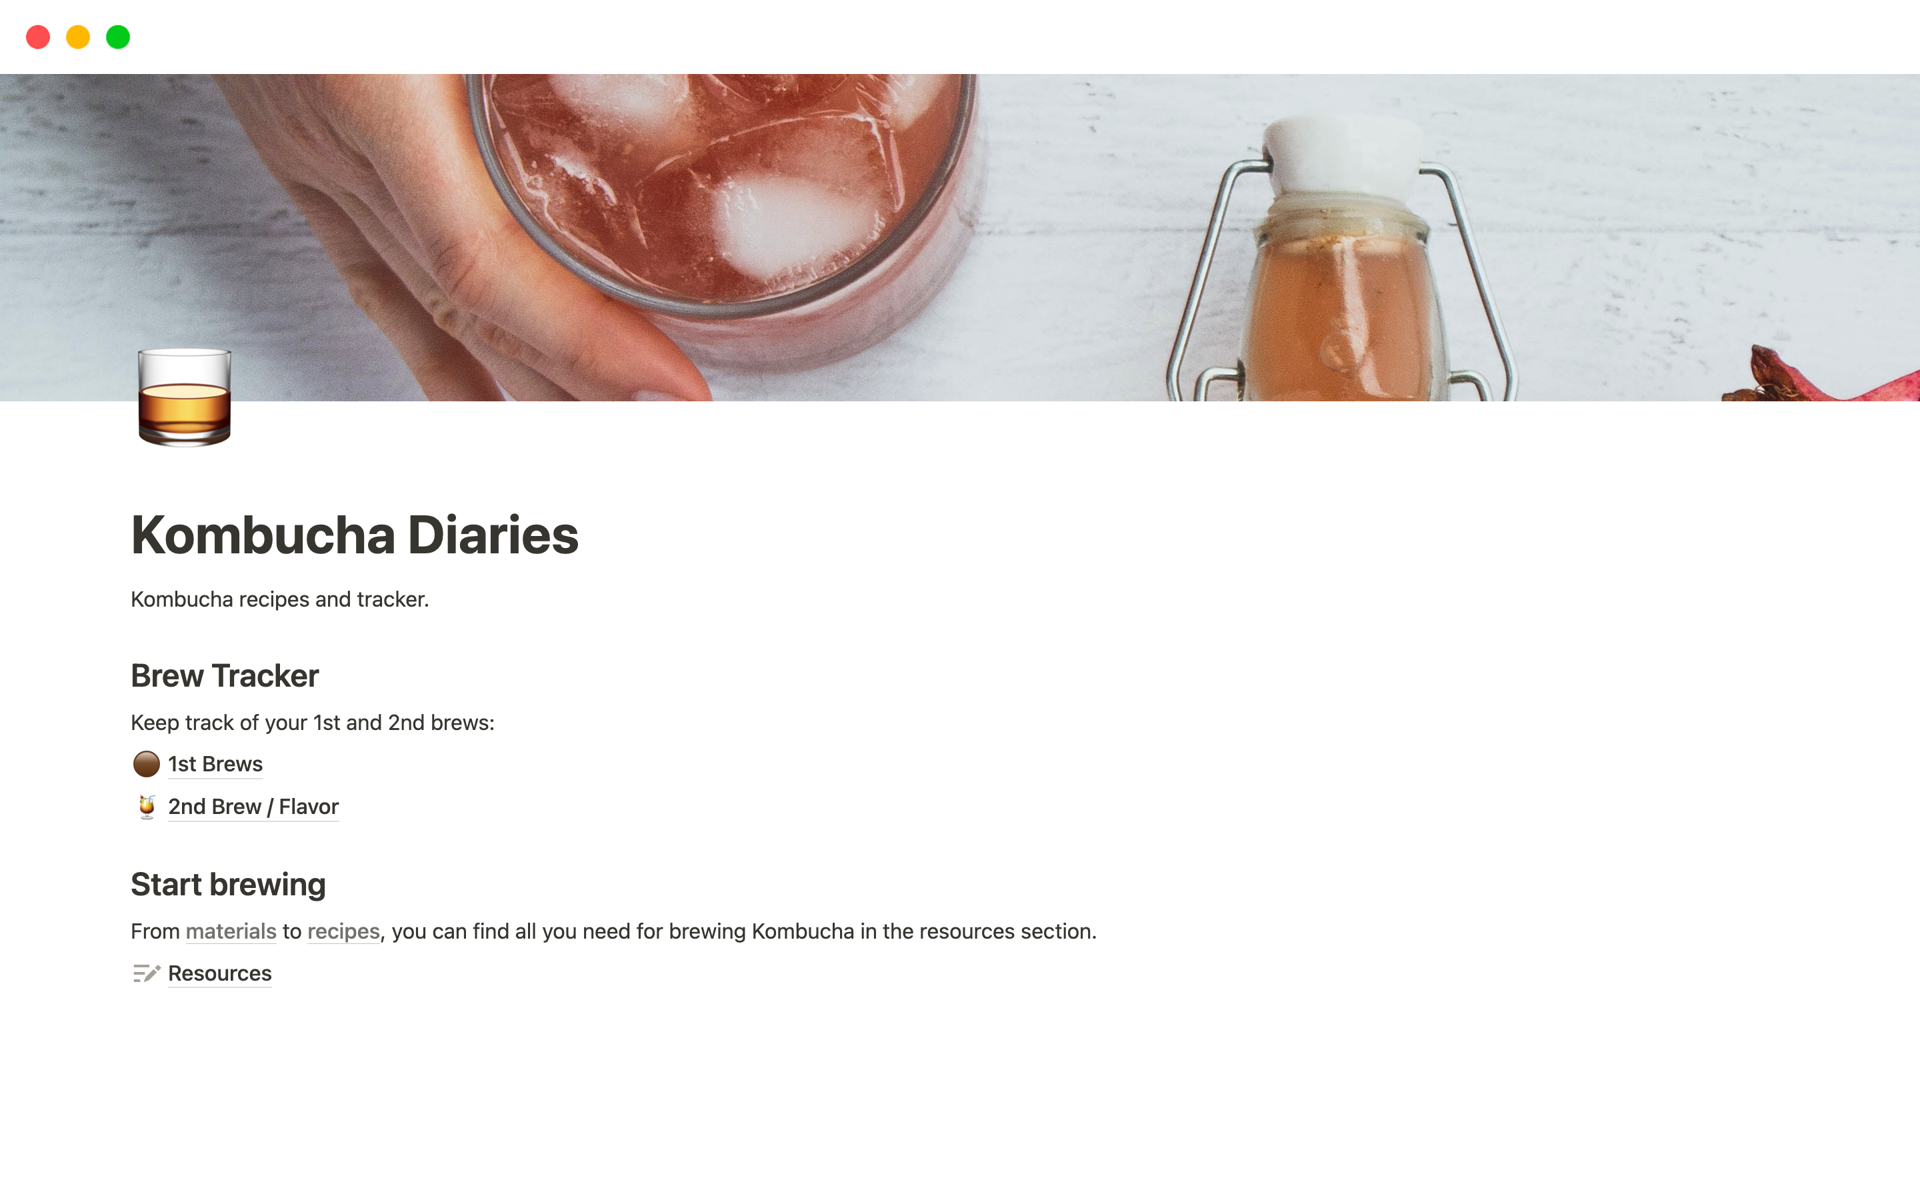 Whether you are thinking of starting to brew your own kombucha, or you have been brewing for a while, this template will help you keep track of your on-going brews, recipes, ingredients, and even the materials you need.